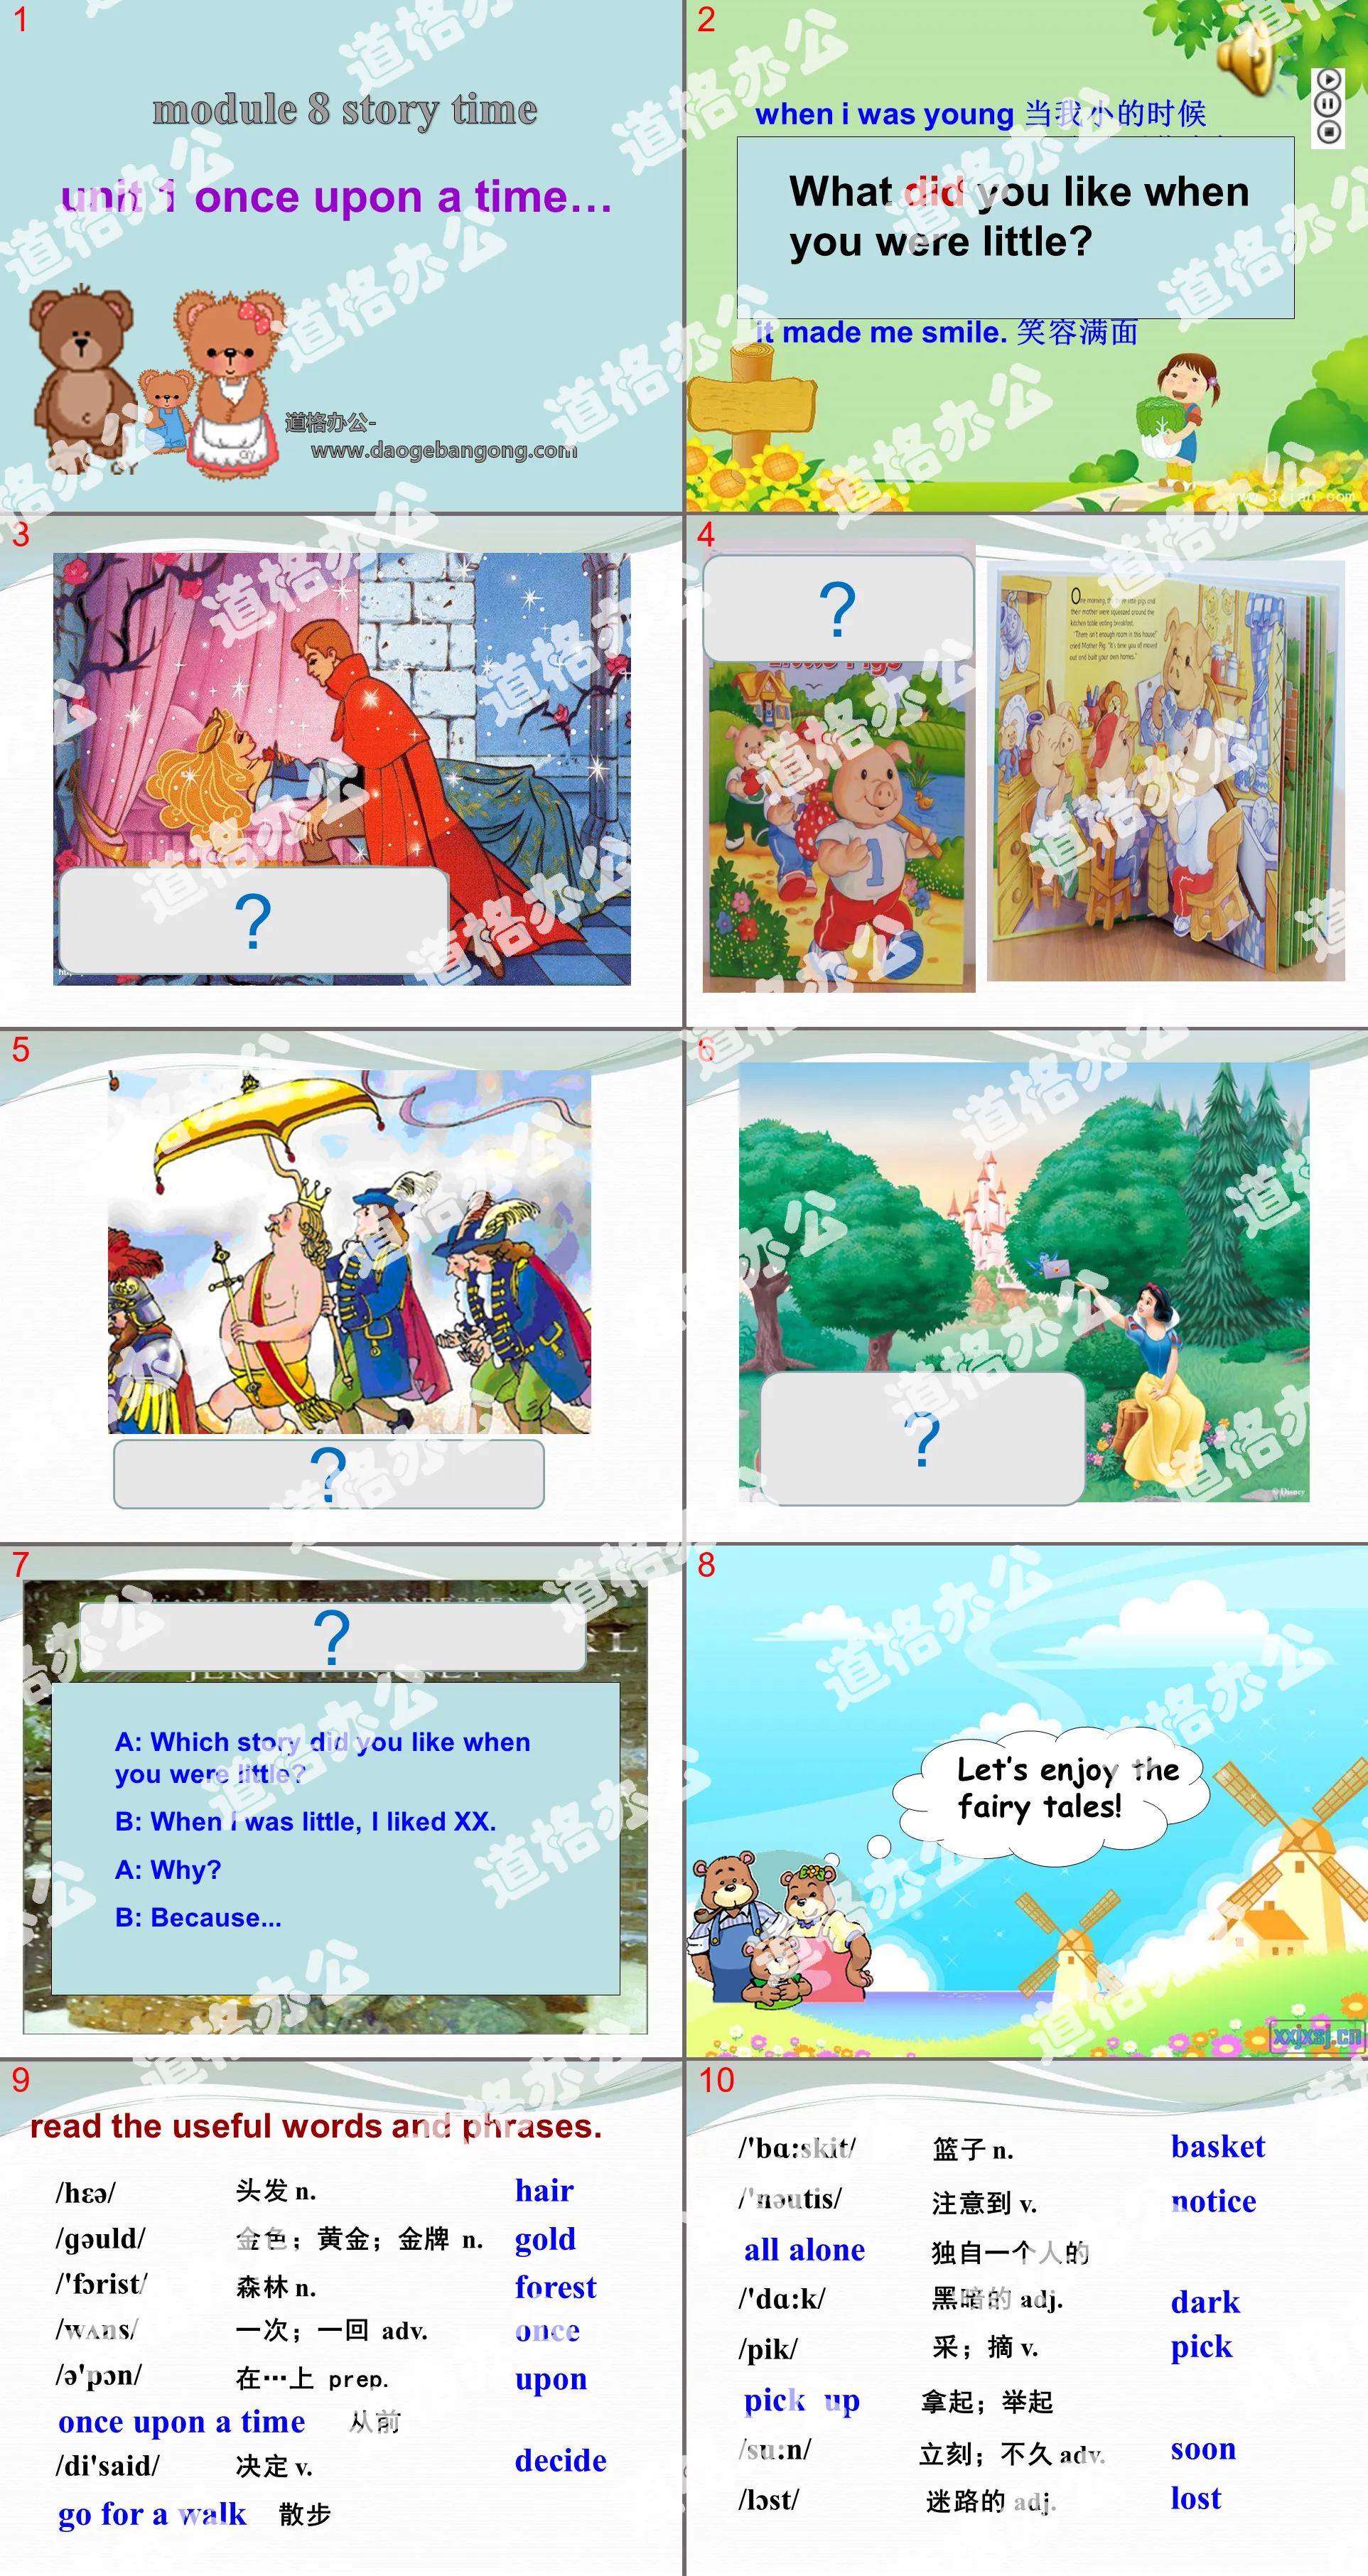 "Once upon a time" Story time PPT courseware 3